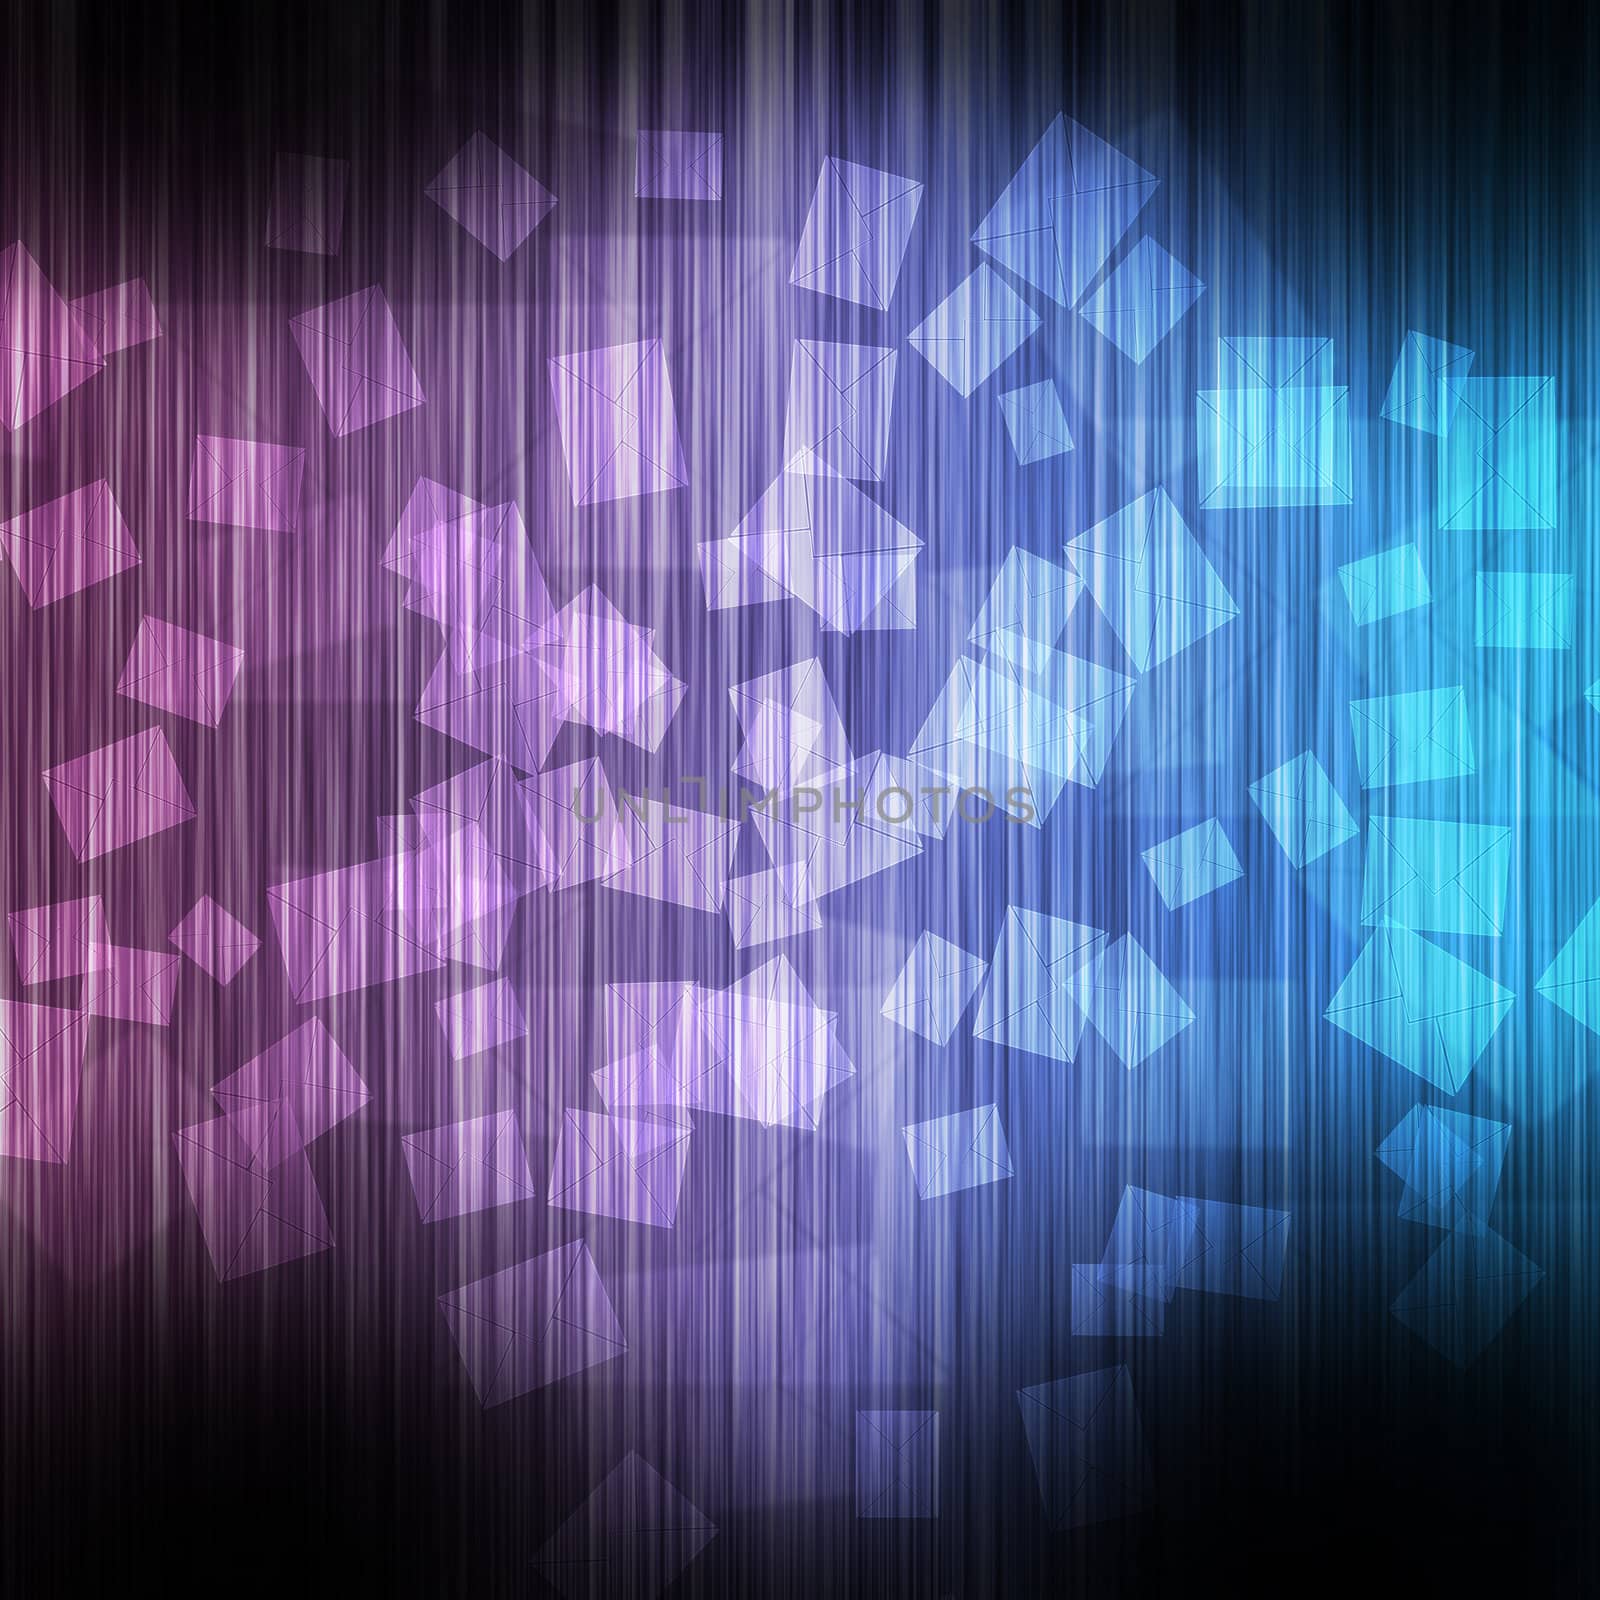 Mail on color wave abstract background 